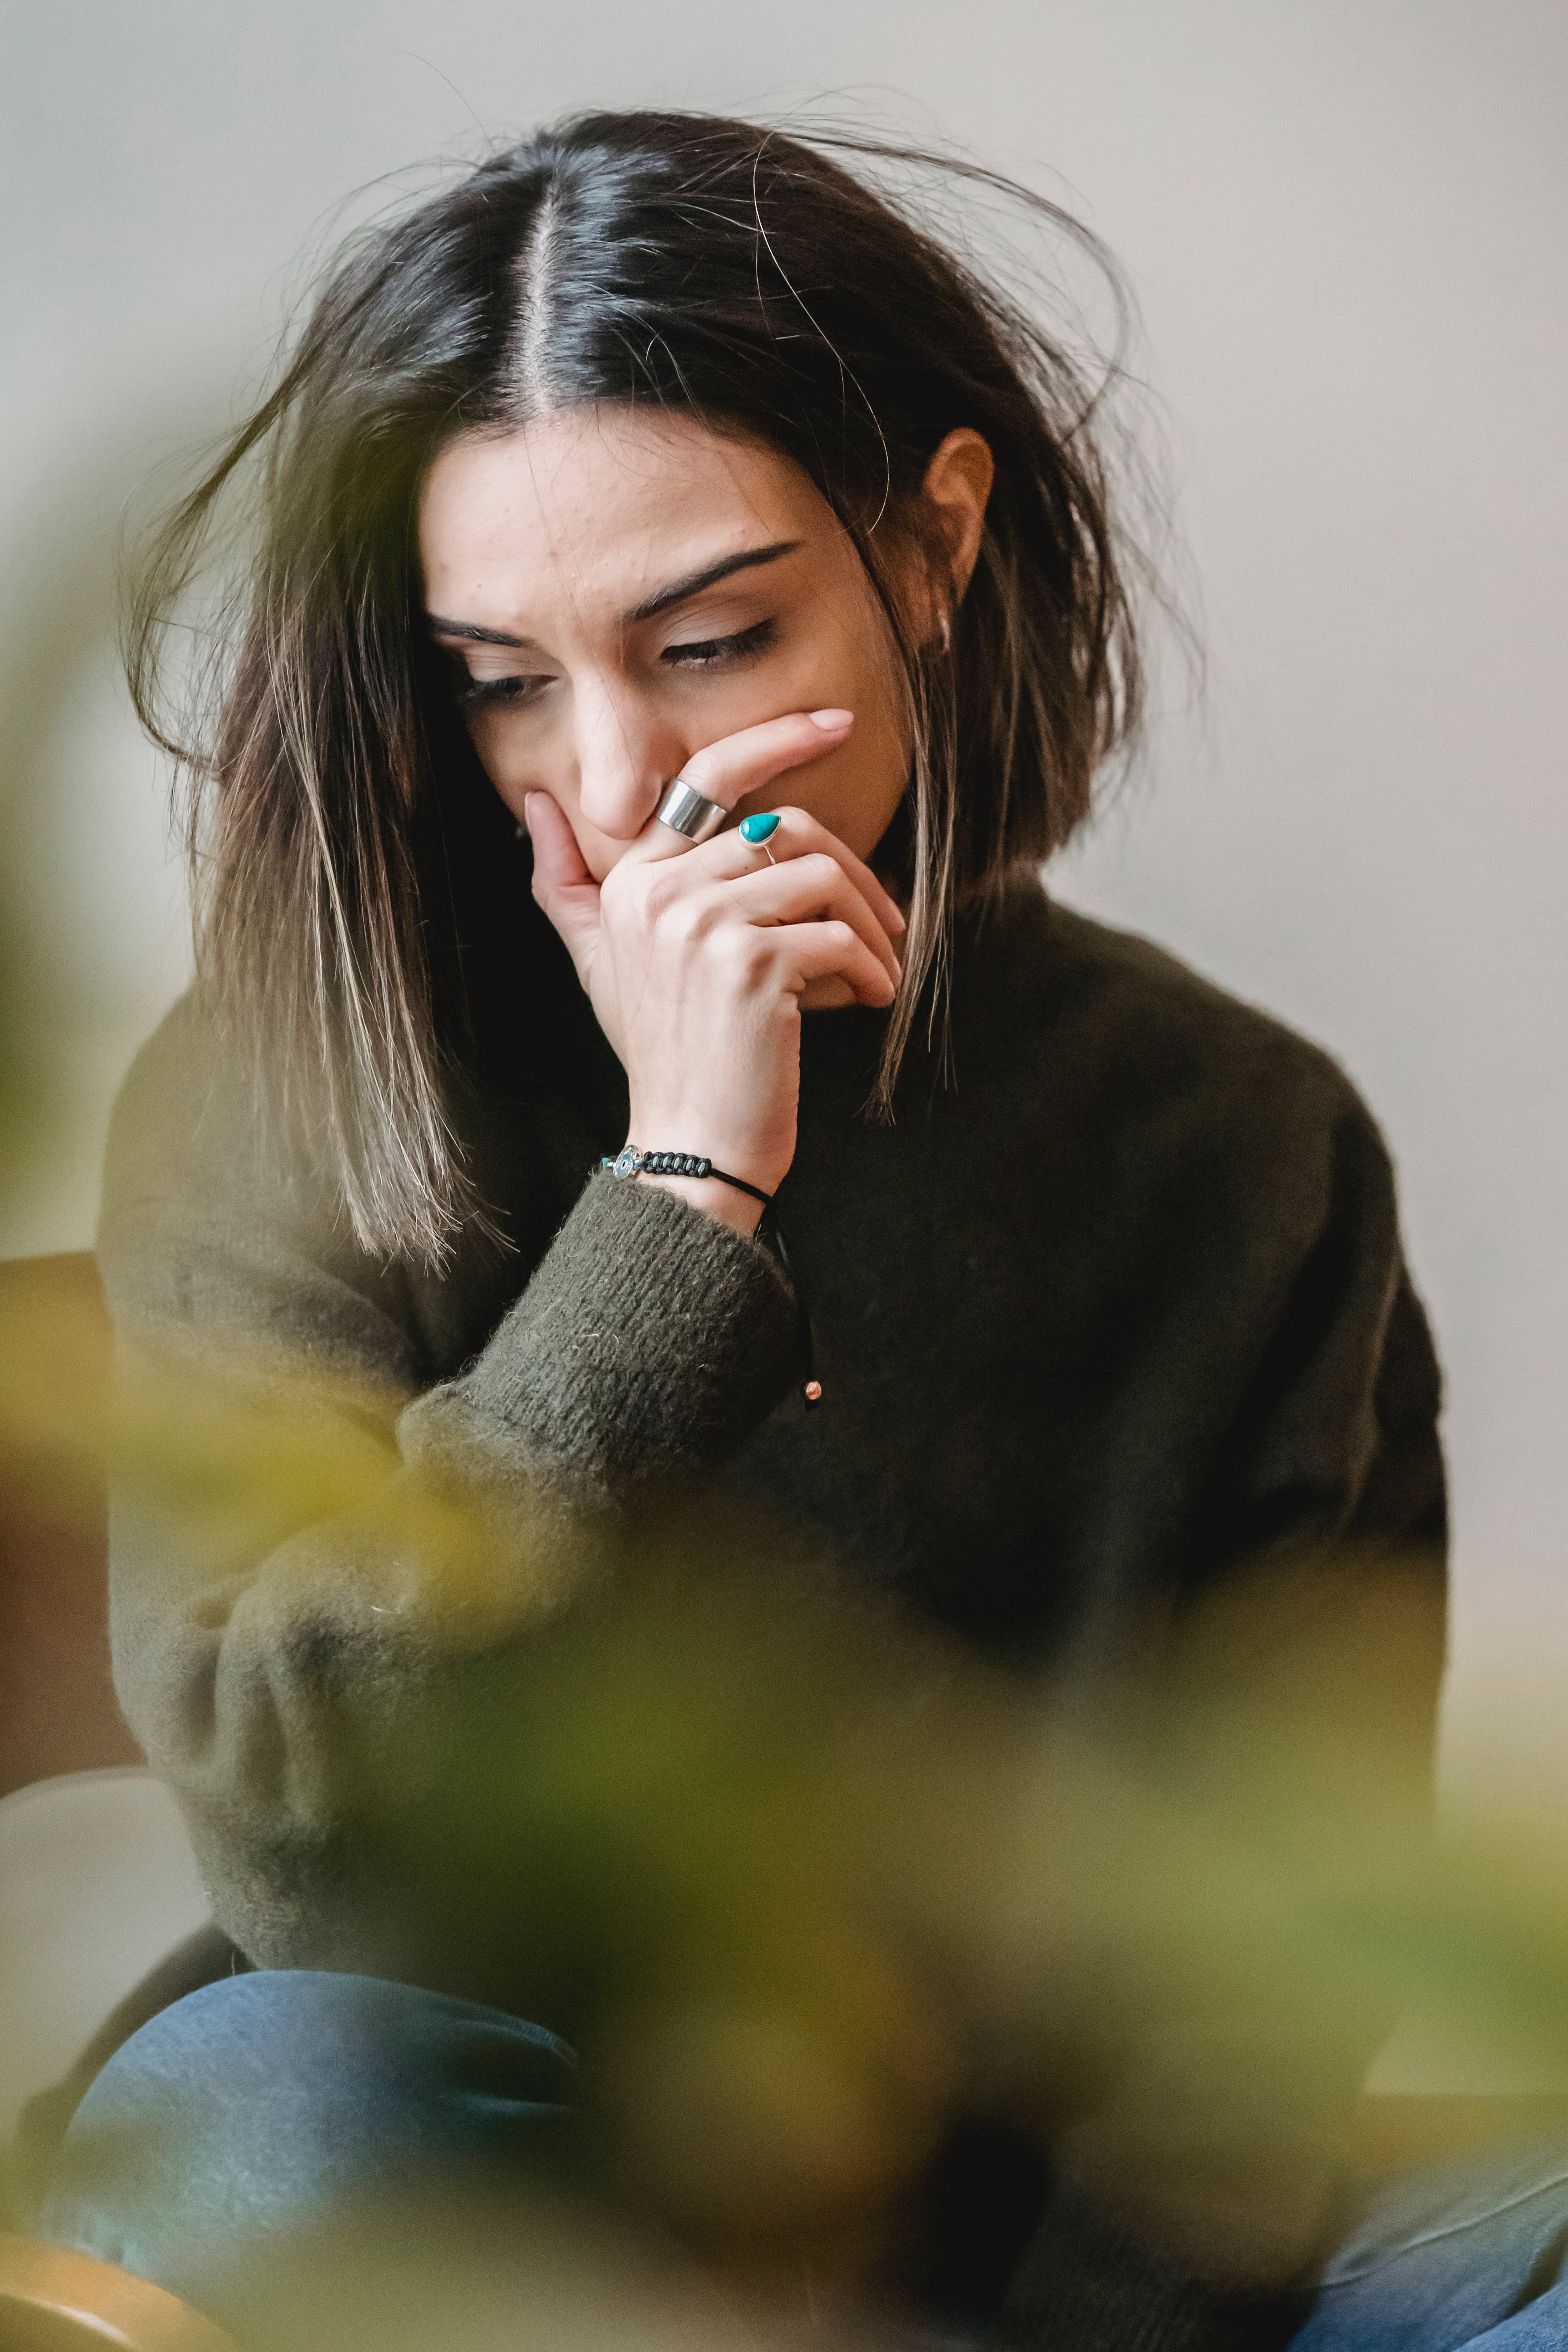 A woman covering her mouth with her hand while contemplating something | Source: Pexels